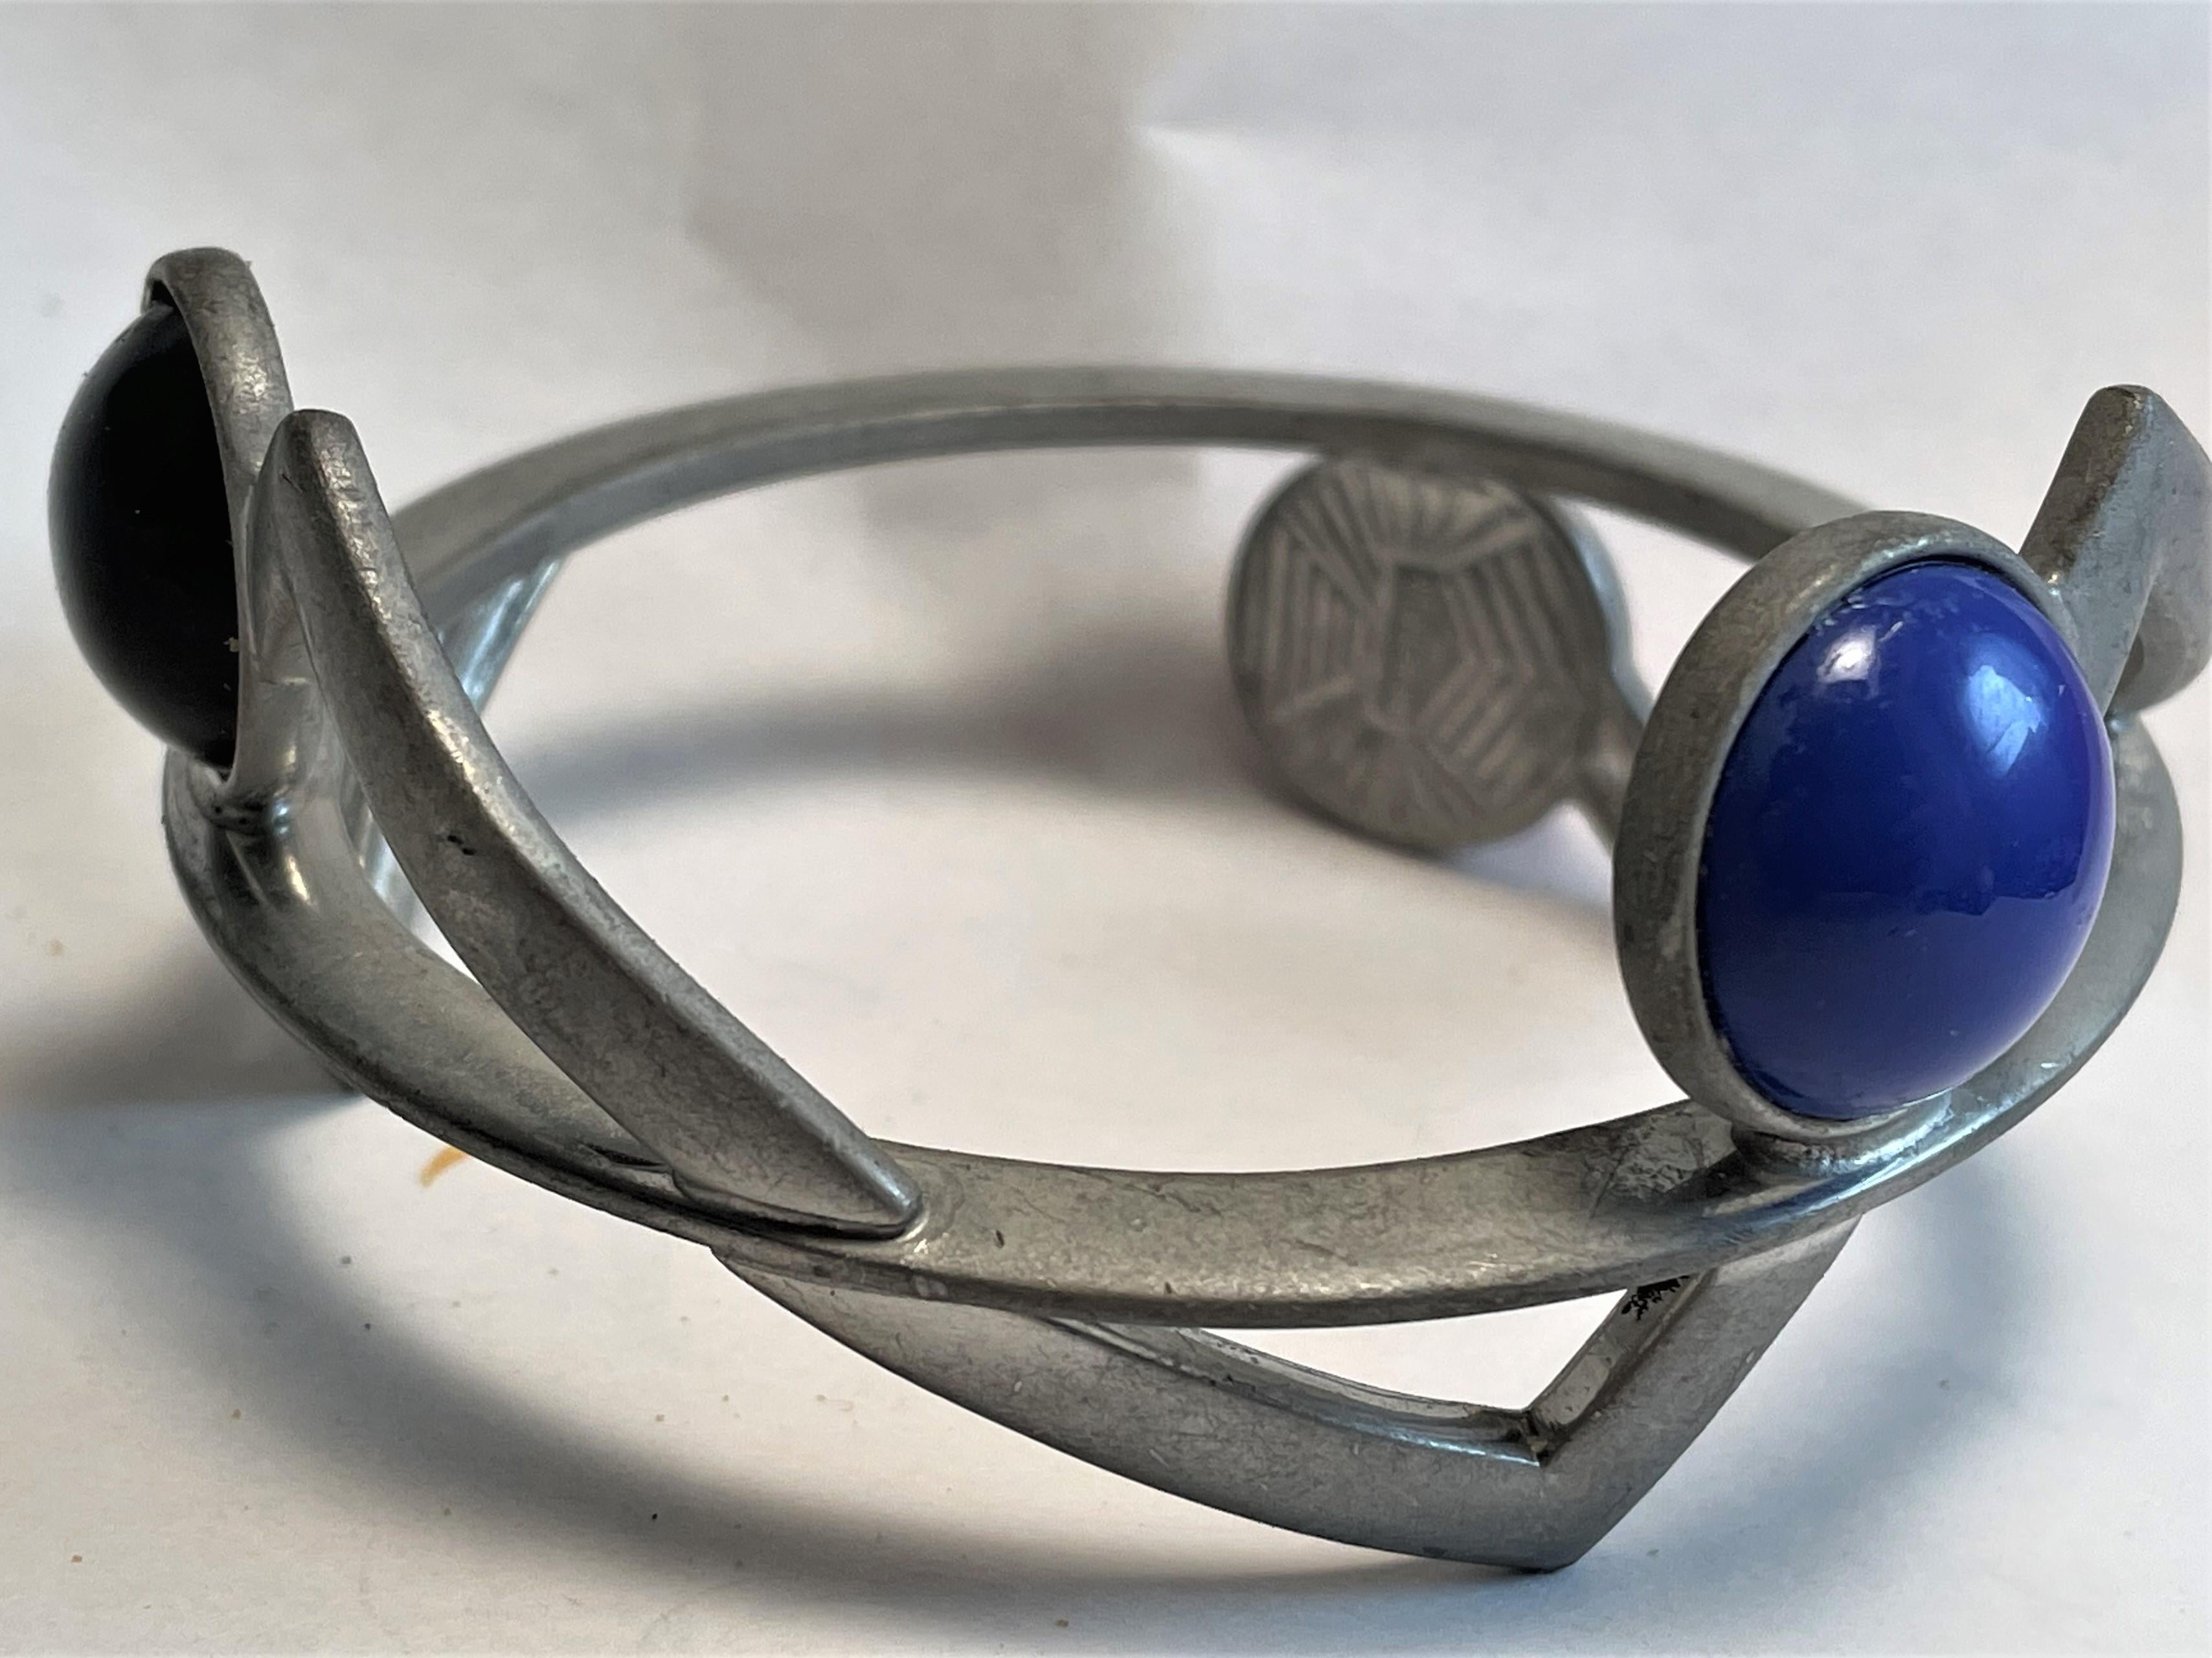 What a wonderful modernist, geometric bangle bracelet this is, because it has a dull gray finish on the outside and a shinier finish on the low spots of the inside, I think it's possible that the original finish has almost completely worn off, but I